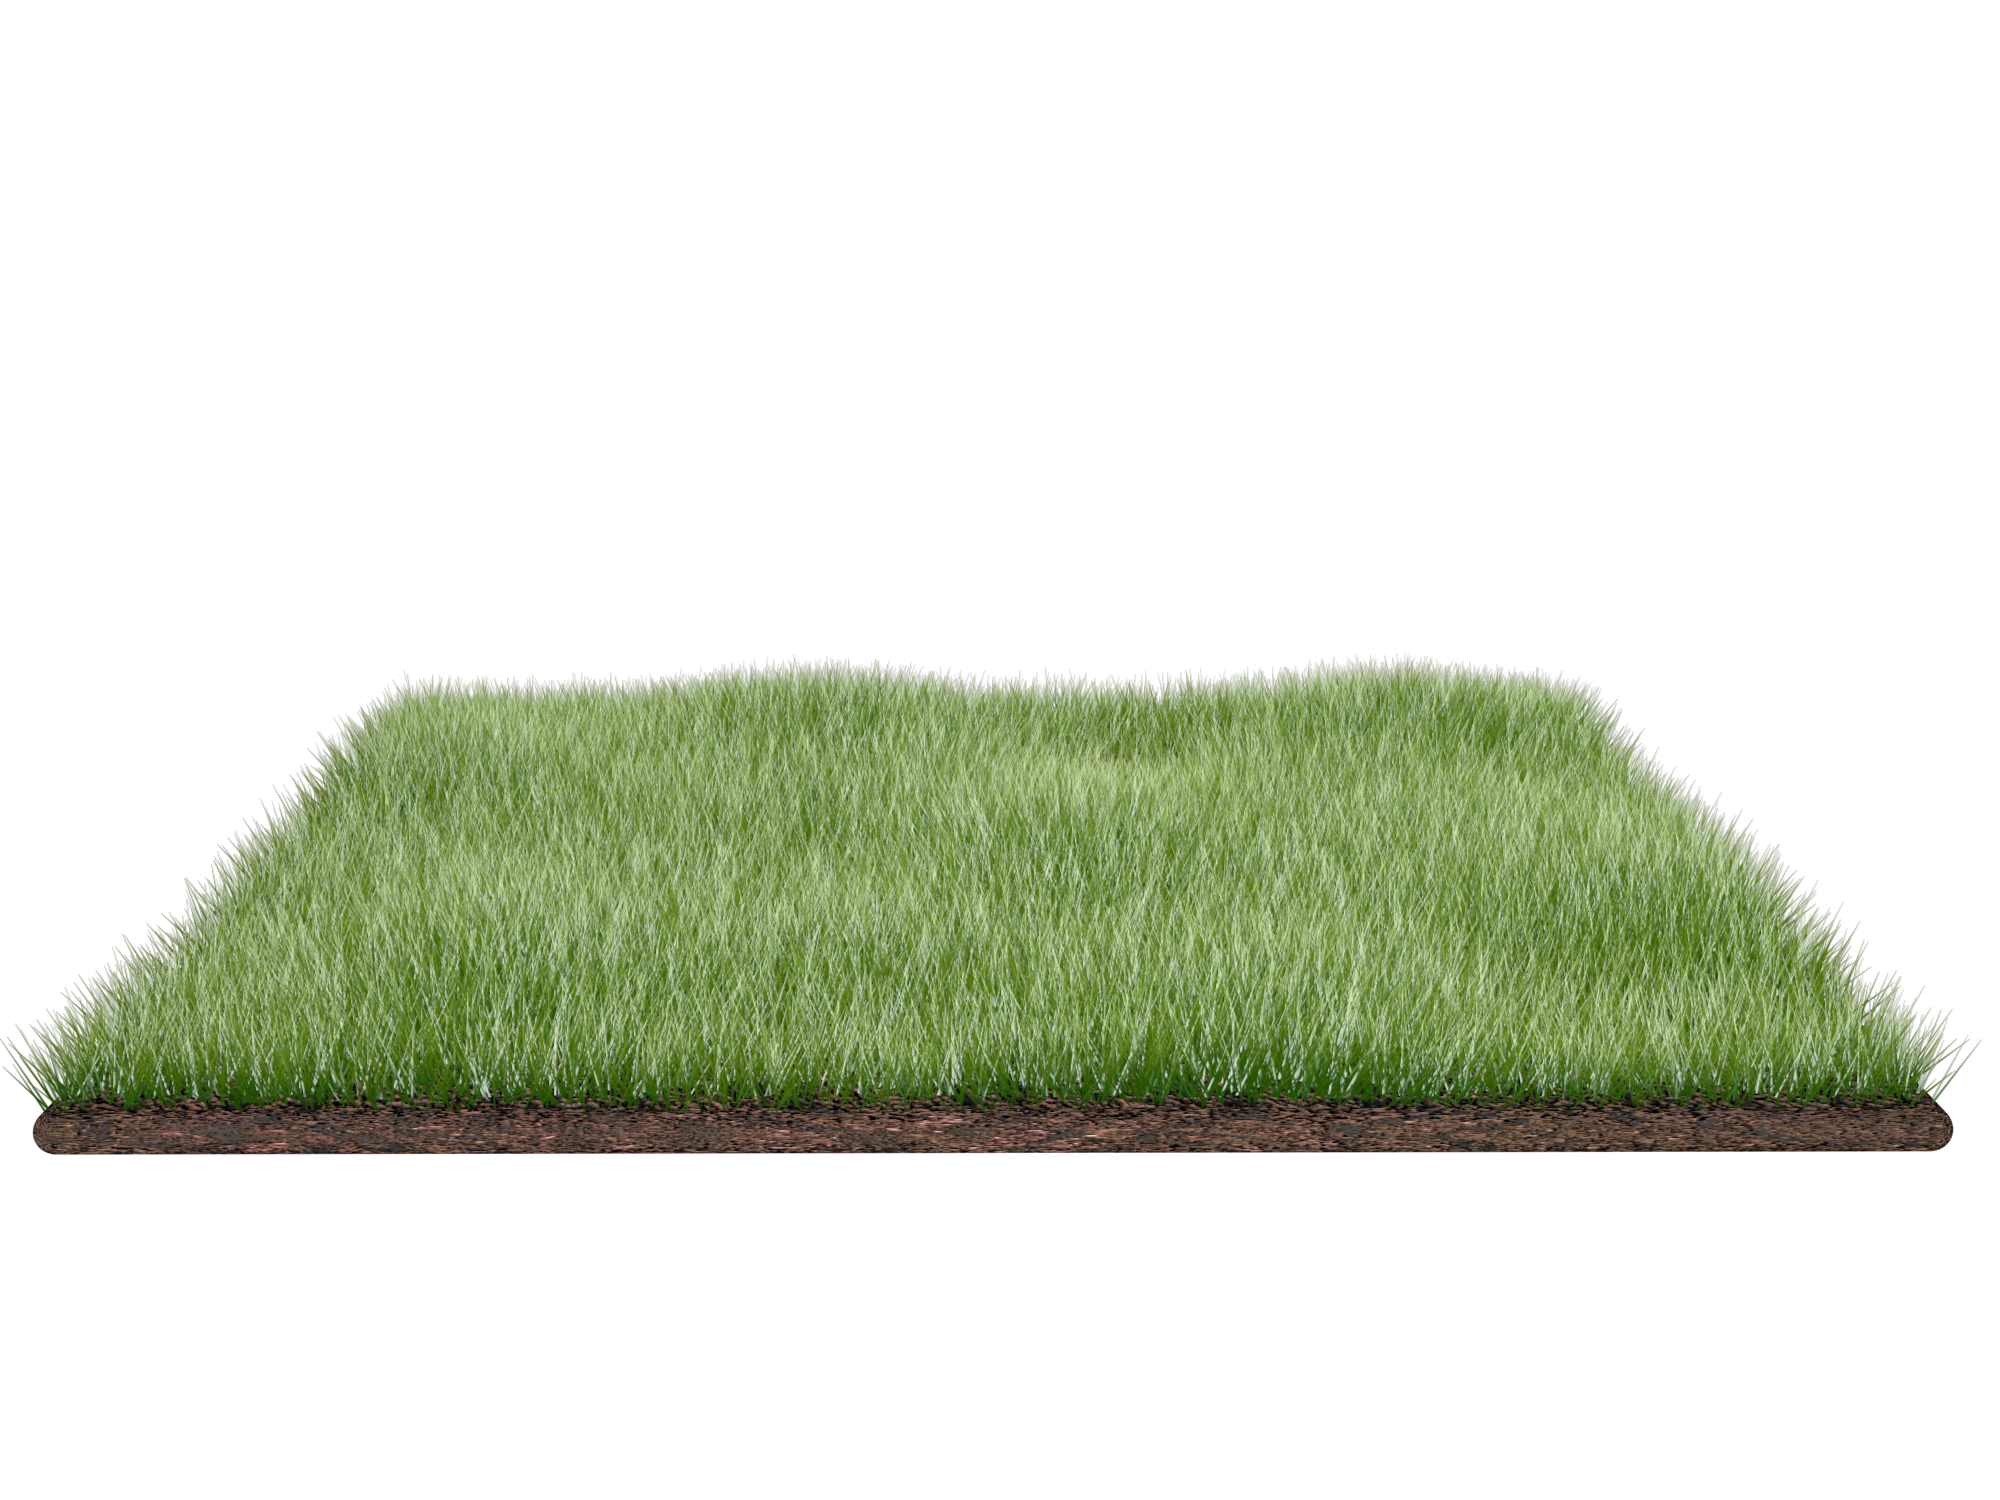 Field clipart grassy area. Grass transparent png pictures